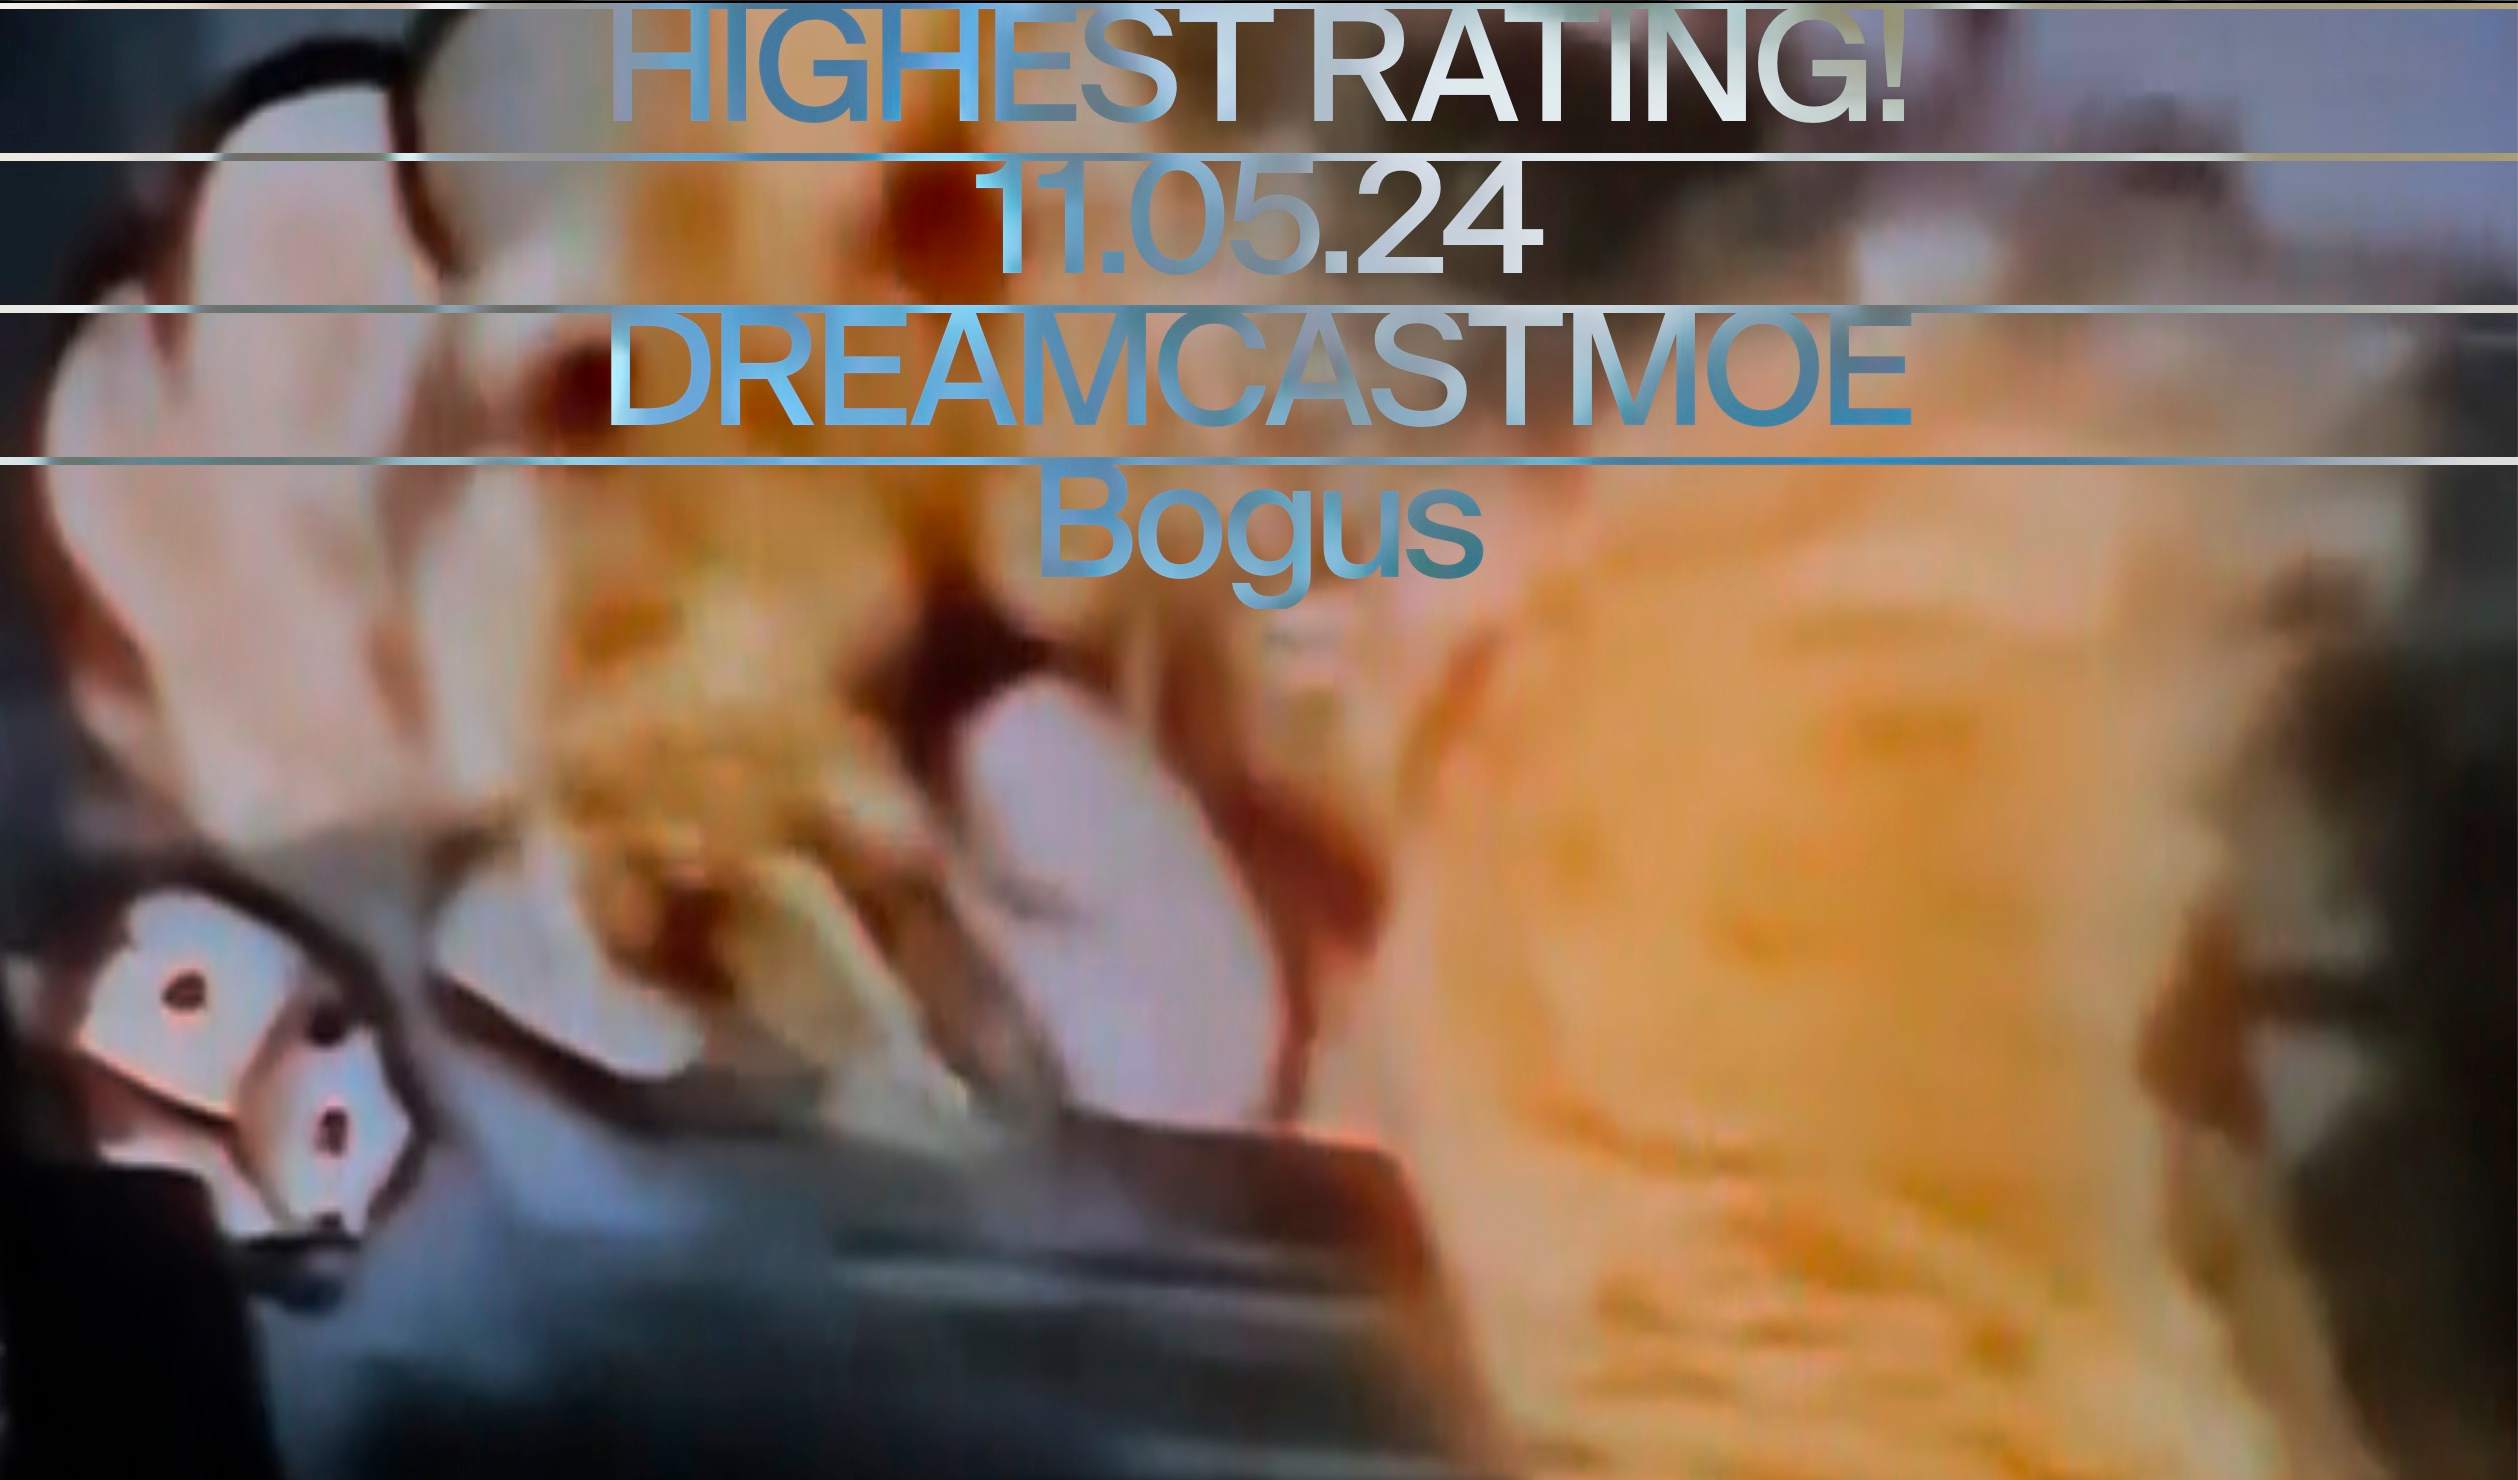 HIGHEST RATING! with dreamcastmoe b/w Bogus - フライヤー表